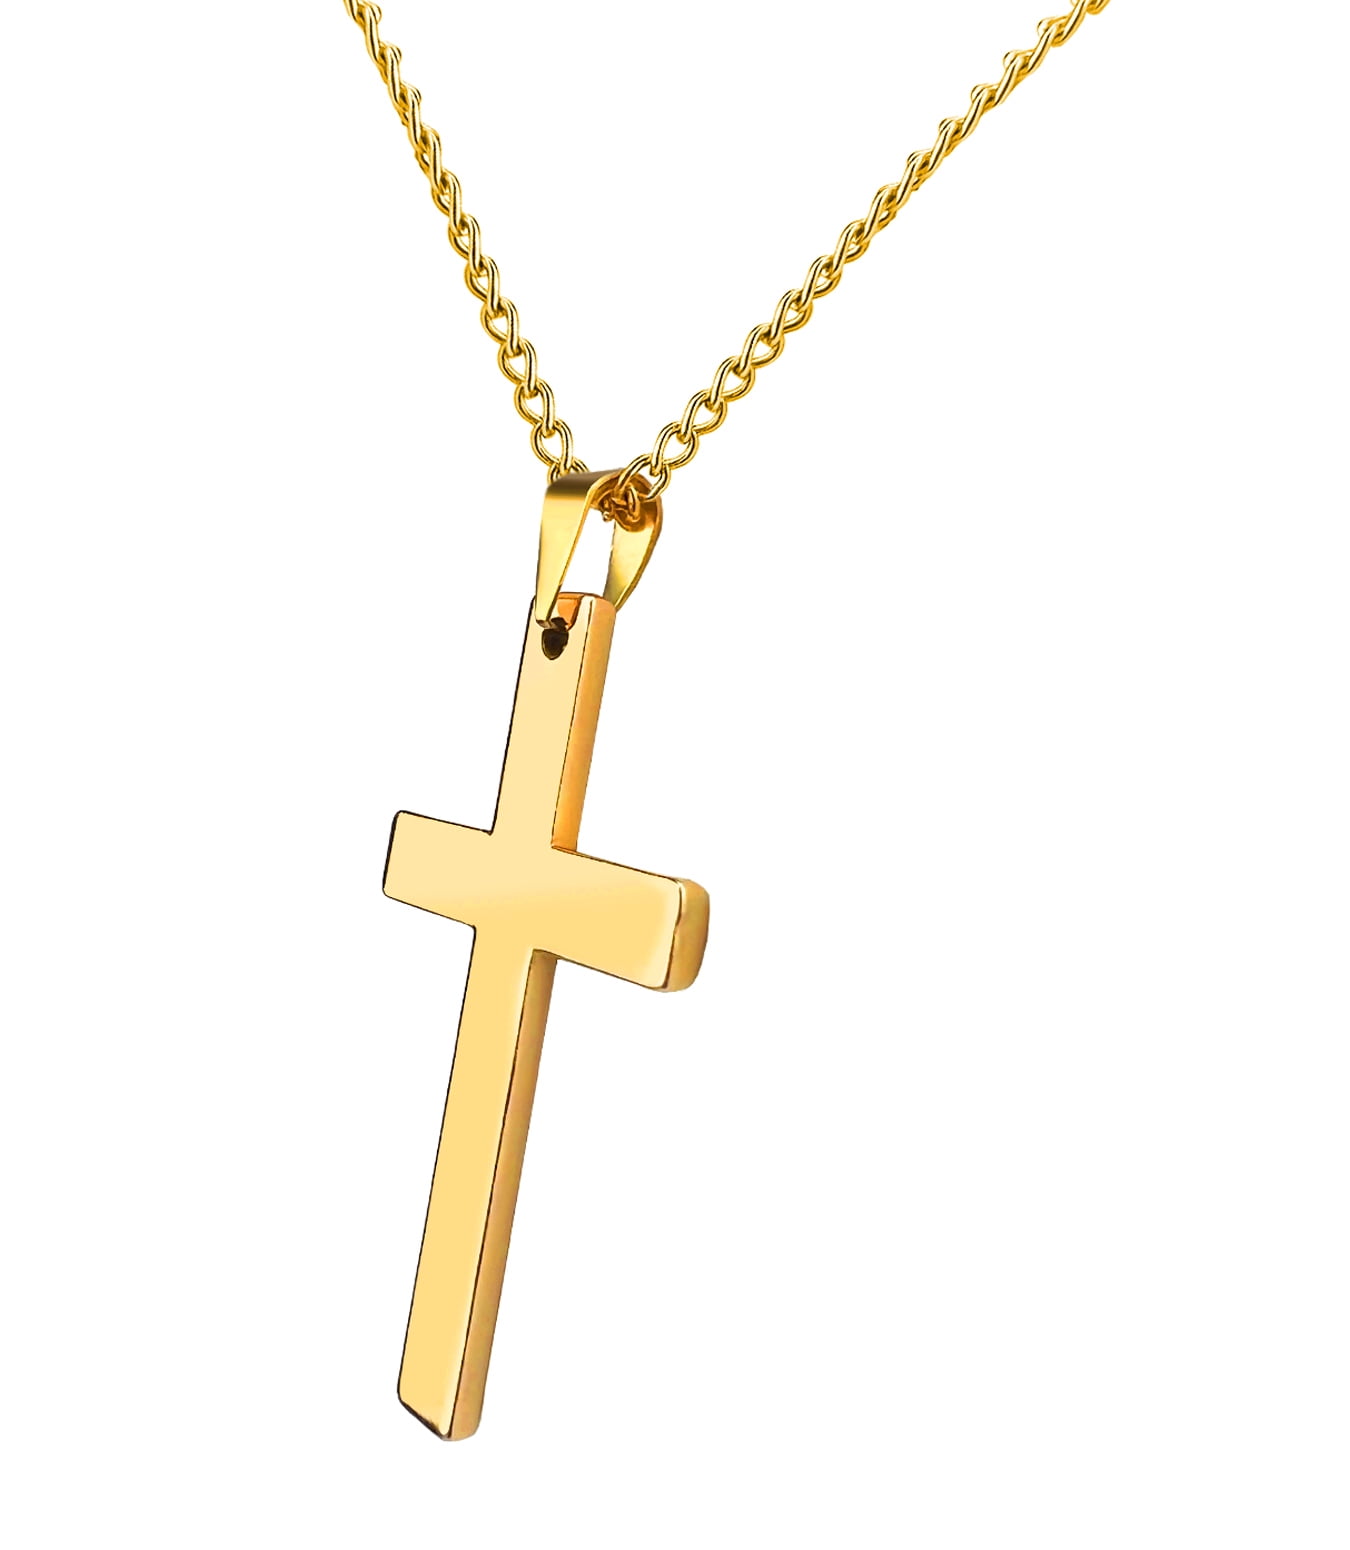 Buy BEST SELLER Gold Filled Cross Choker Necklace Women Crystal Cross Charm  Chunky Chain Sterling Silver Thick Chain Necklaces Online in India - Etsy